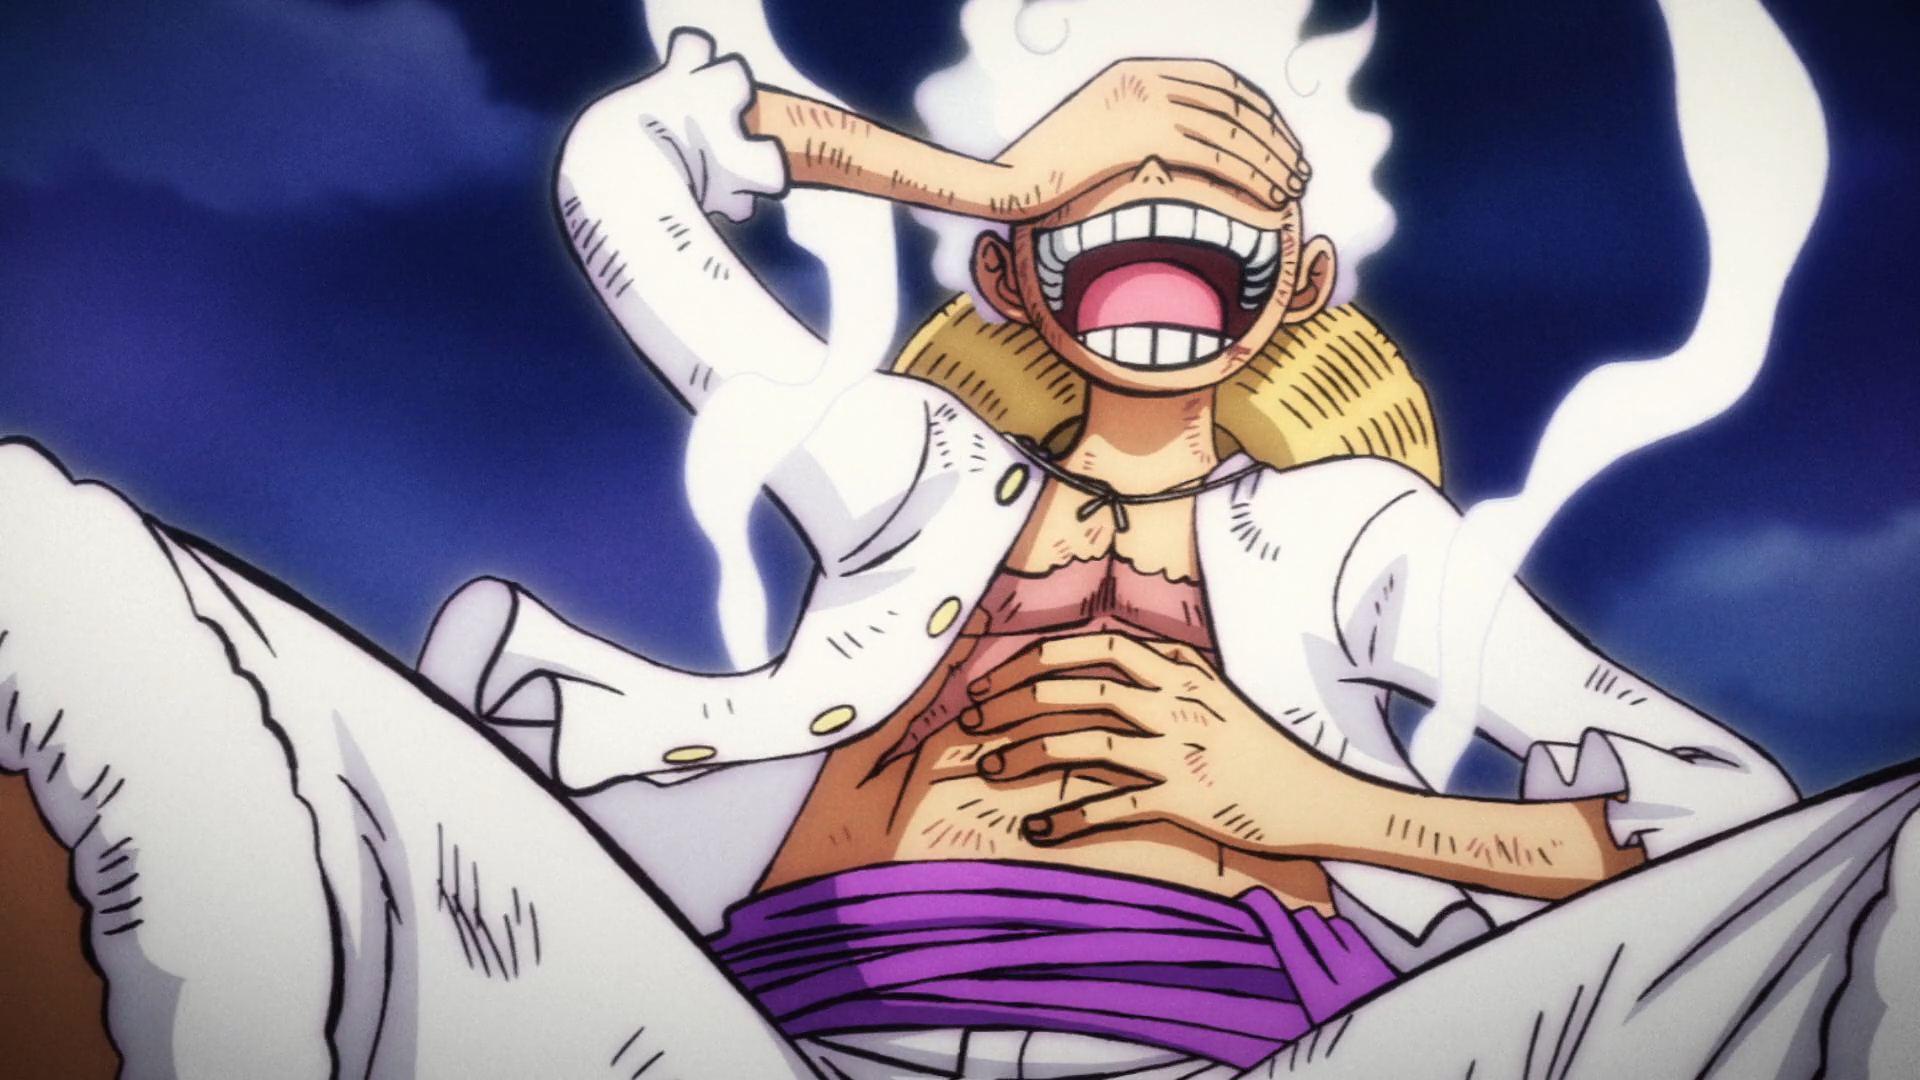 One Piece - Episode 1071 [Review] — The Geekly Grind